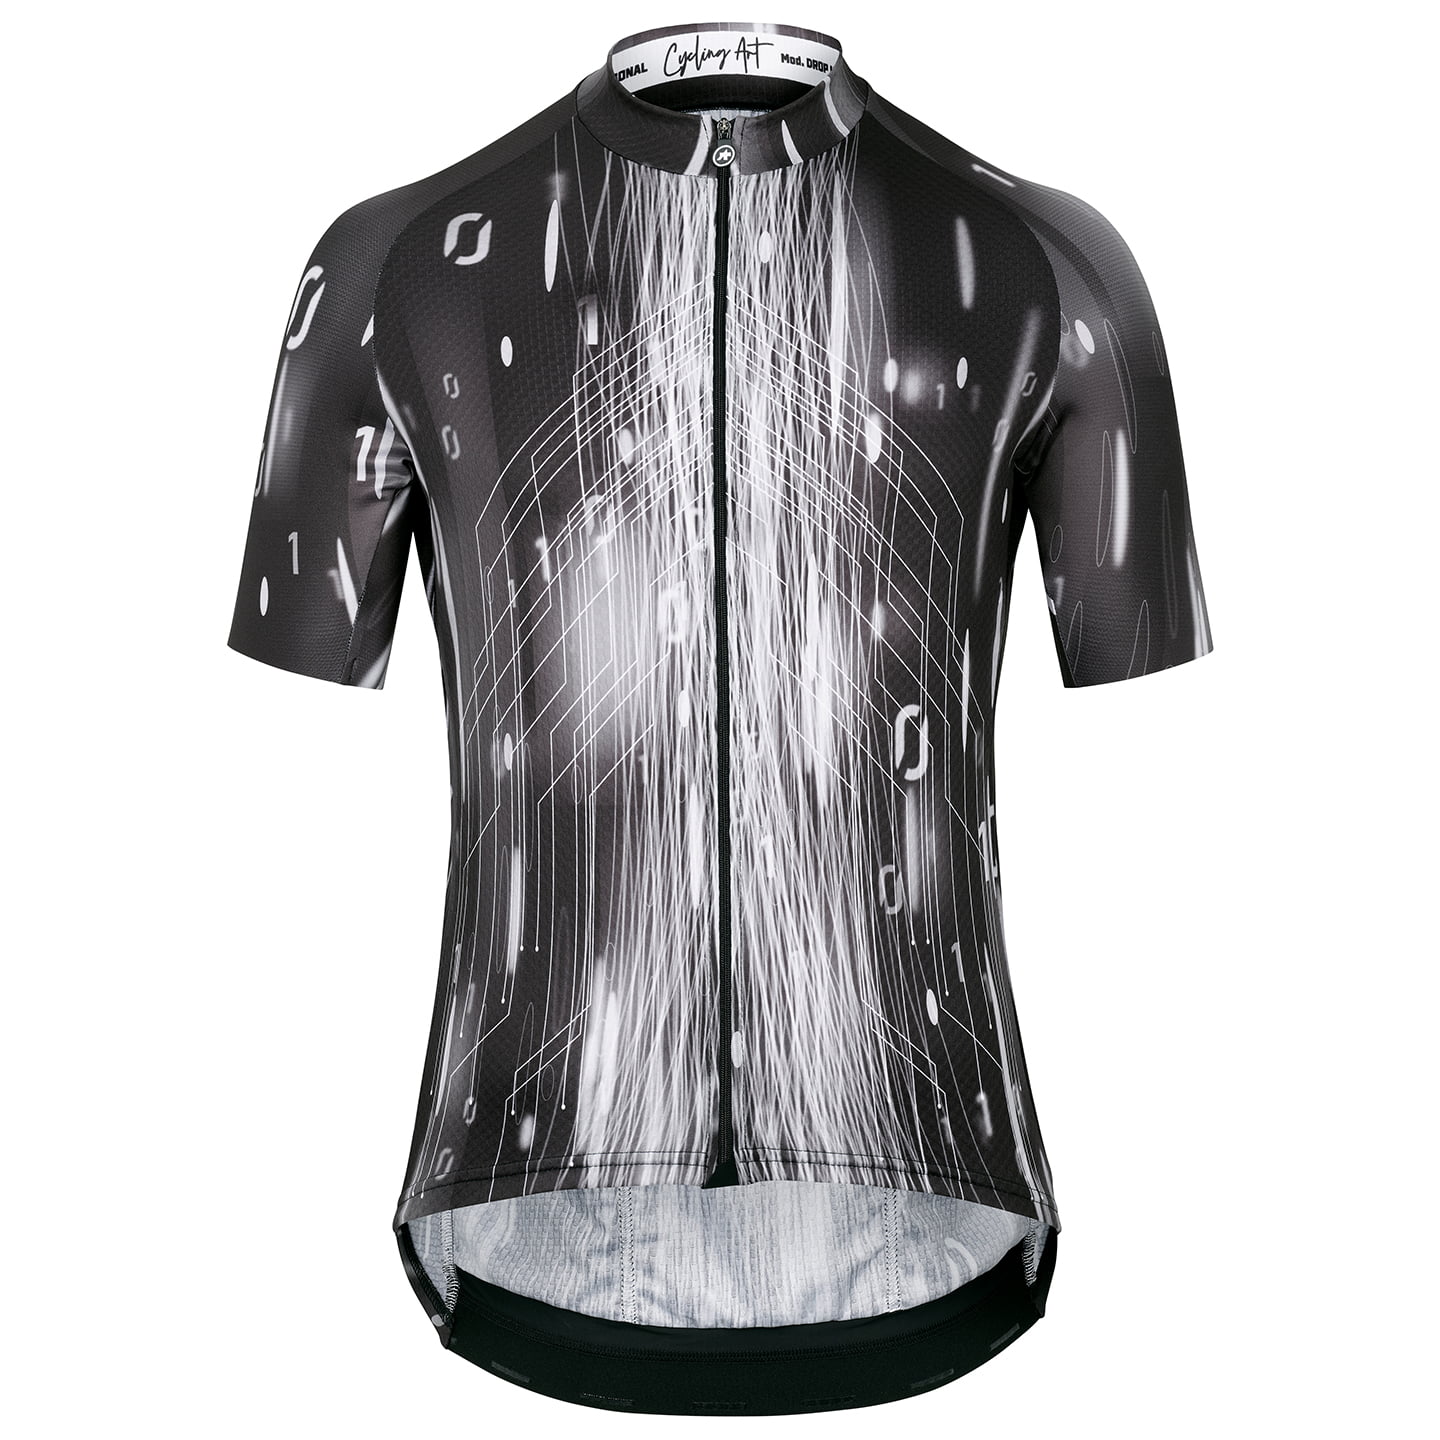 ASSOS Mille GT c2 Drop Head Short Sleeve Jersey Short Sleeve Jersey, for men, size 2XL, Cycling jersey, Cycle clothing